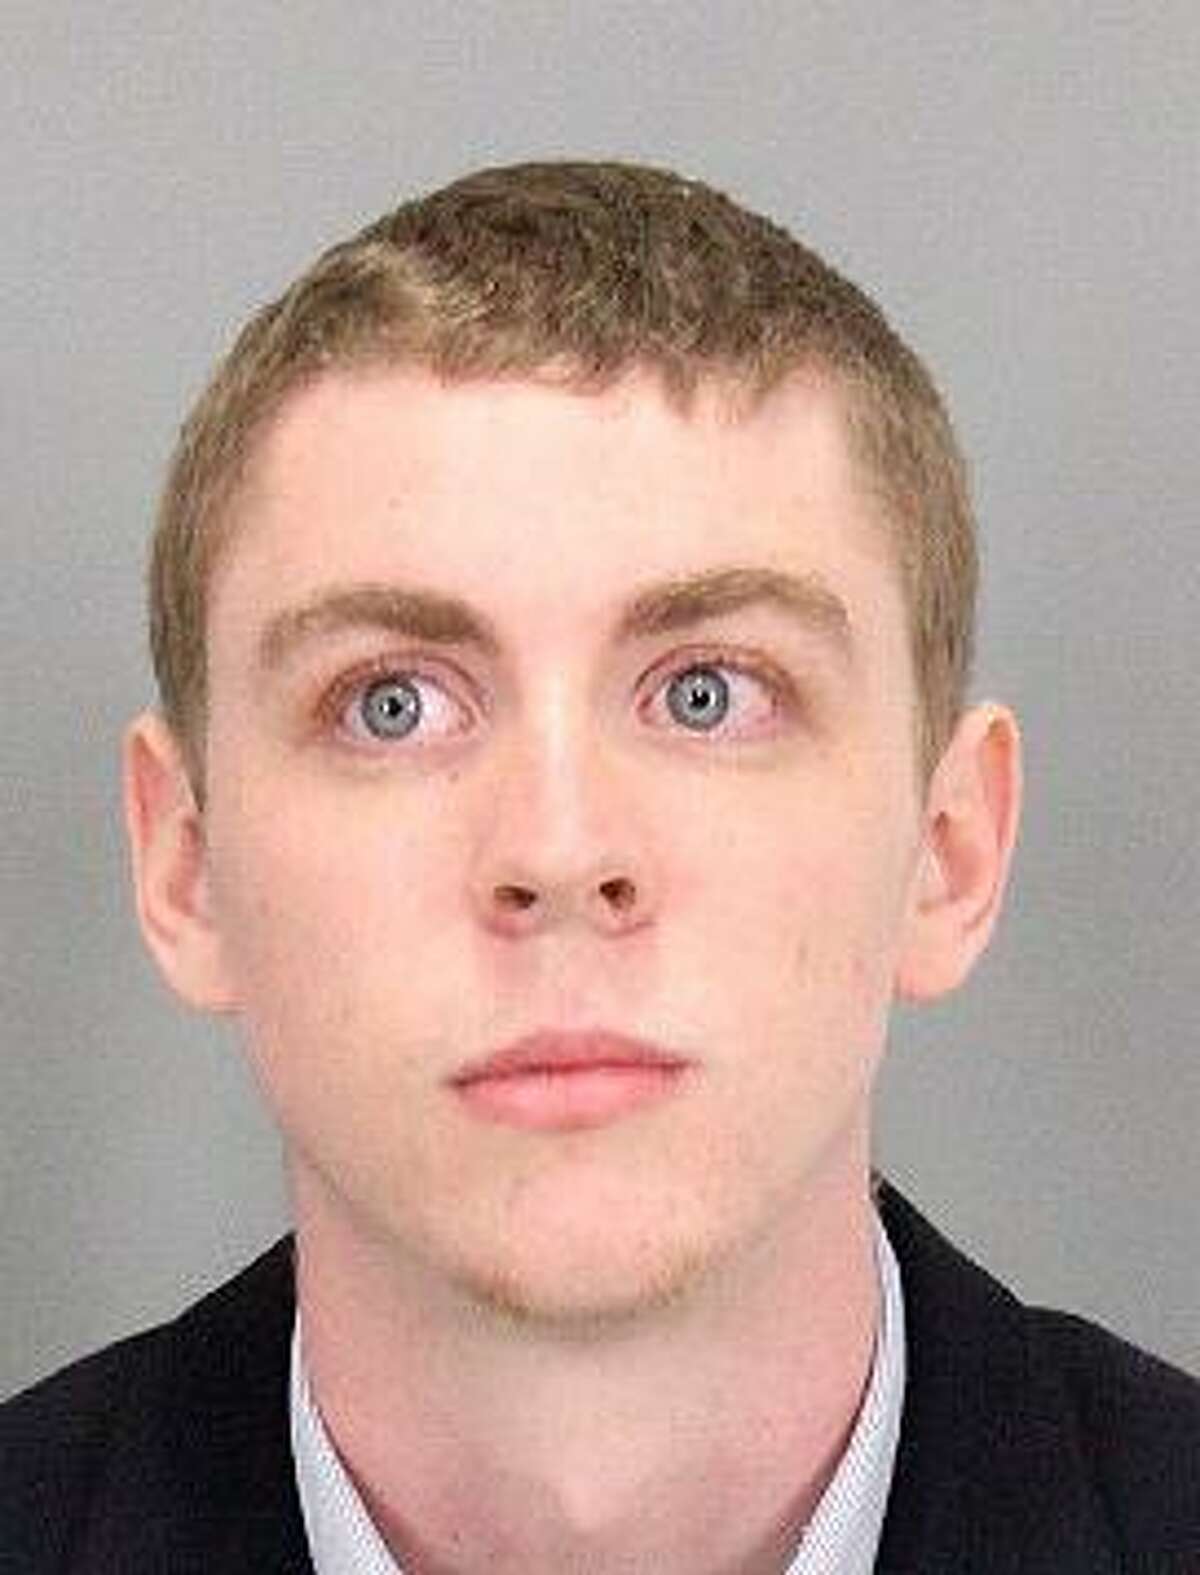 Brock Turner was convicted of sexual assault in 2016.